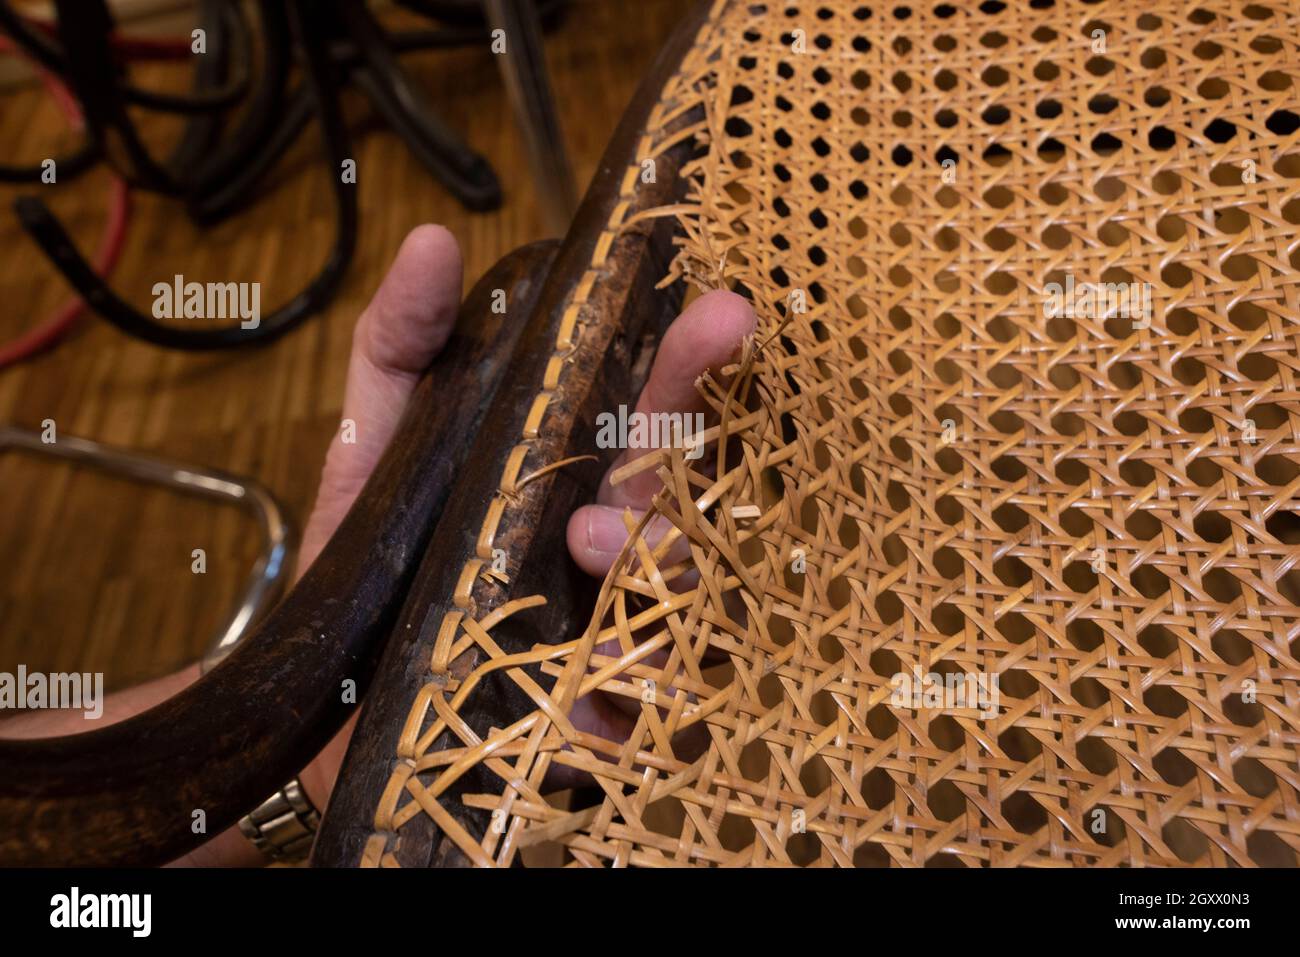 basket weaving in a sheltered workshop, work with disabled or handicapped people Stock Photo